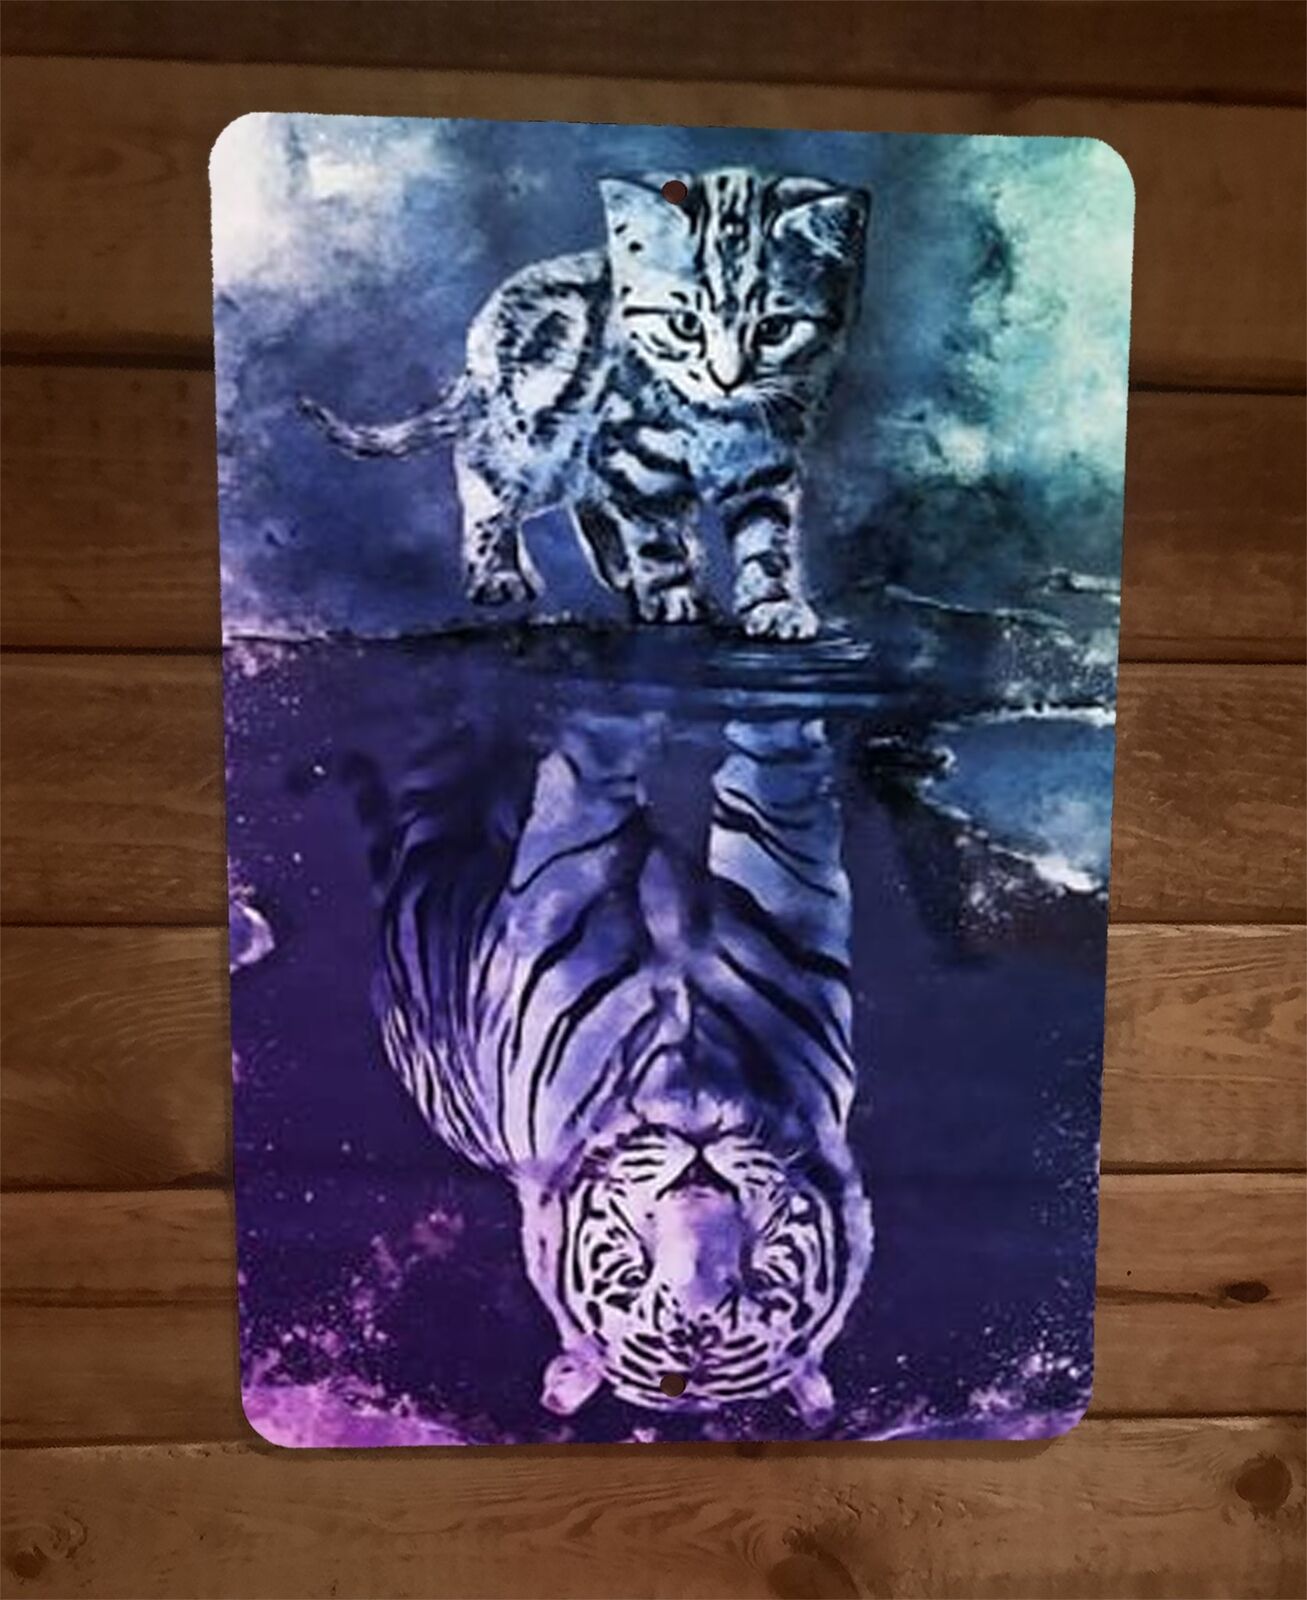 Kitten Cat White Tiger Reflection in Water 8x12 Metal Wall Animal Sign